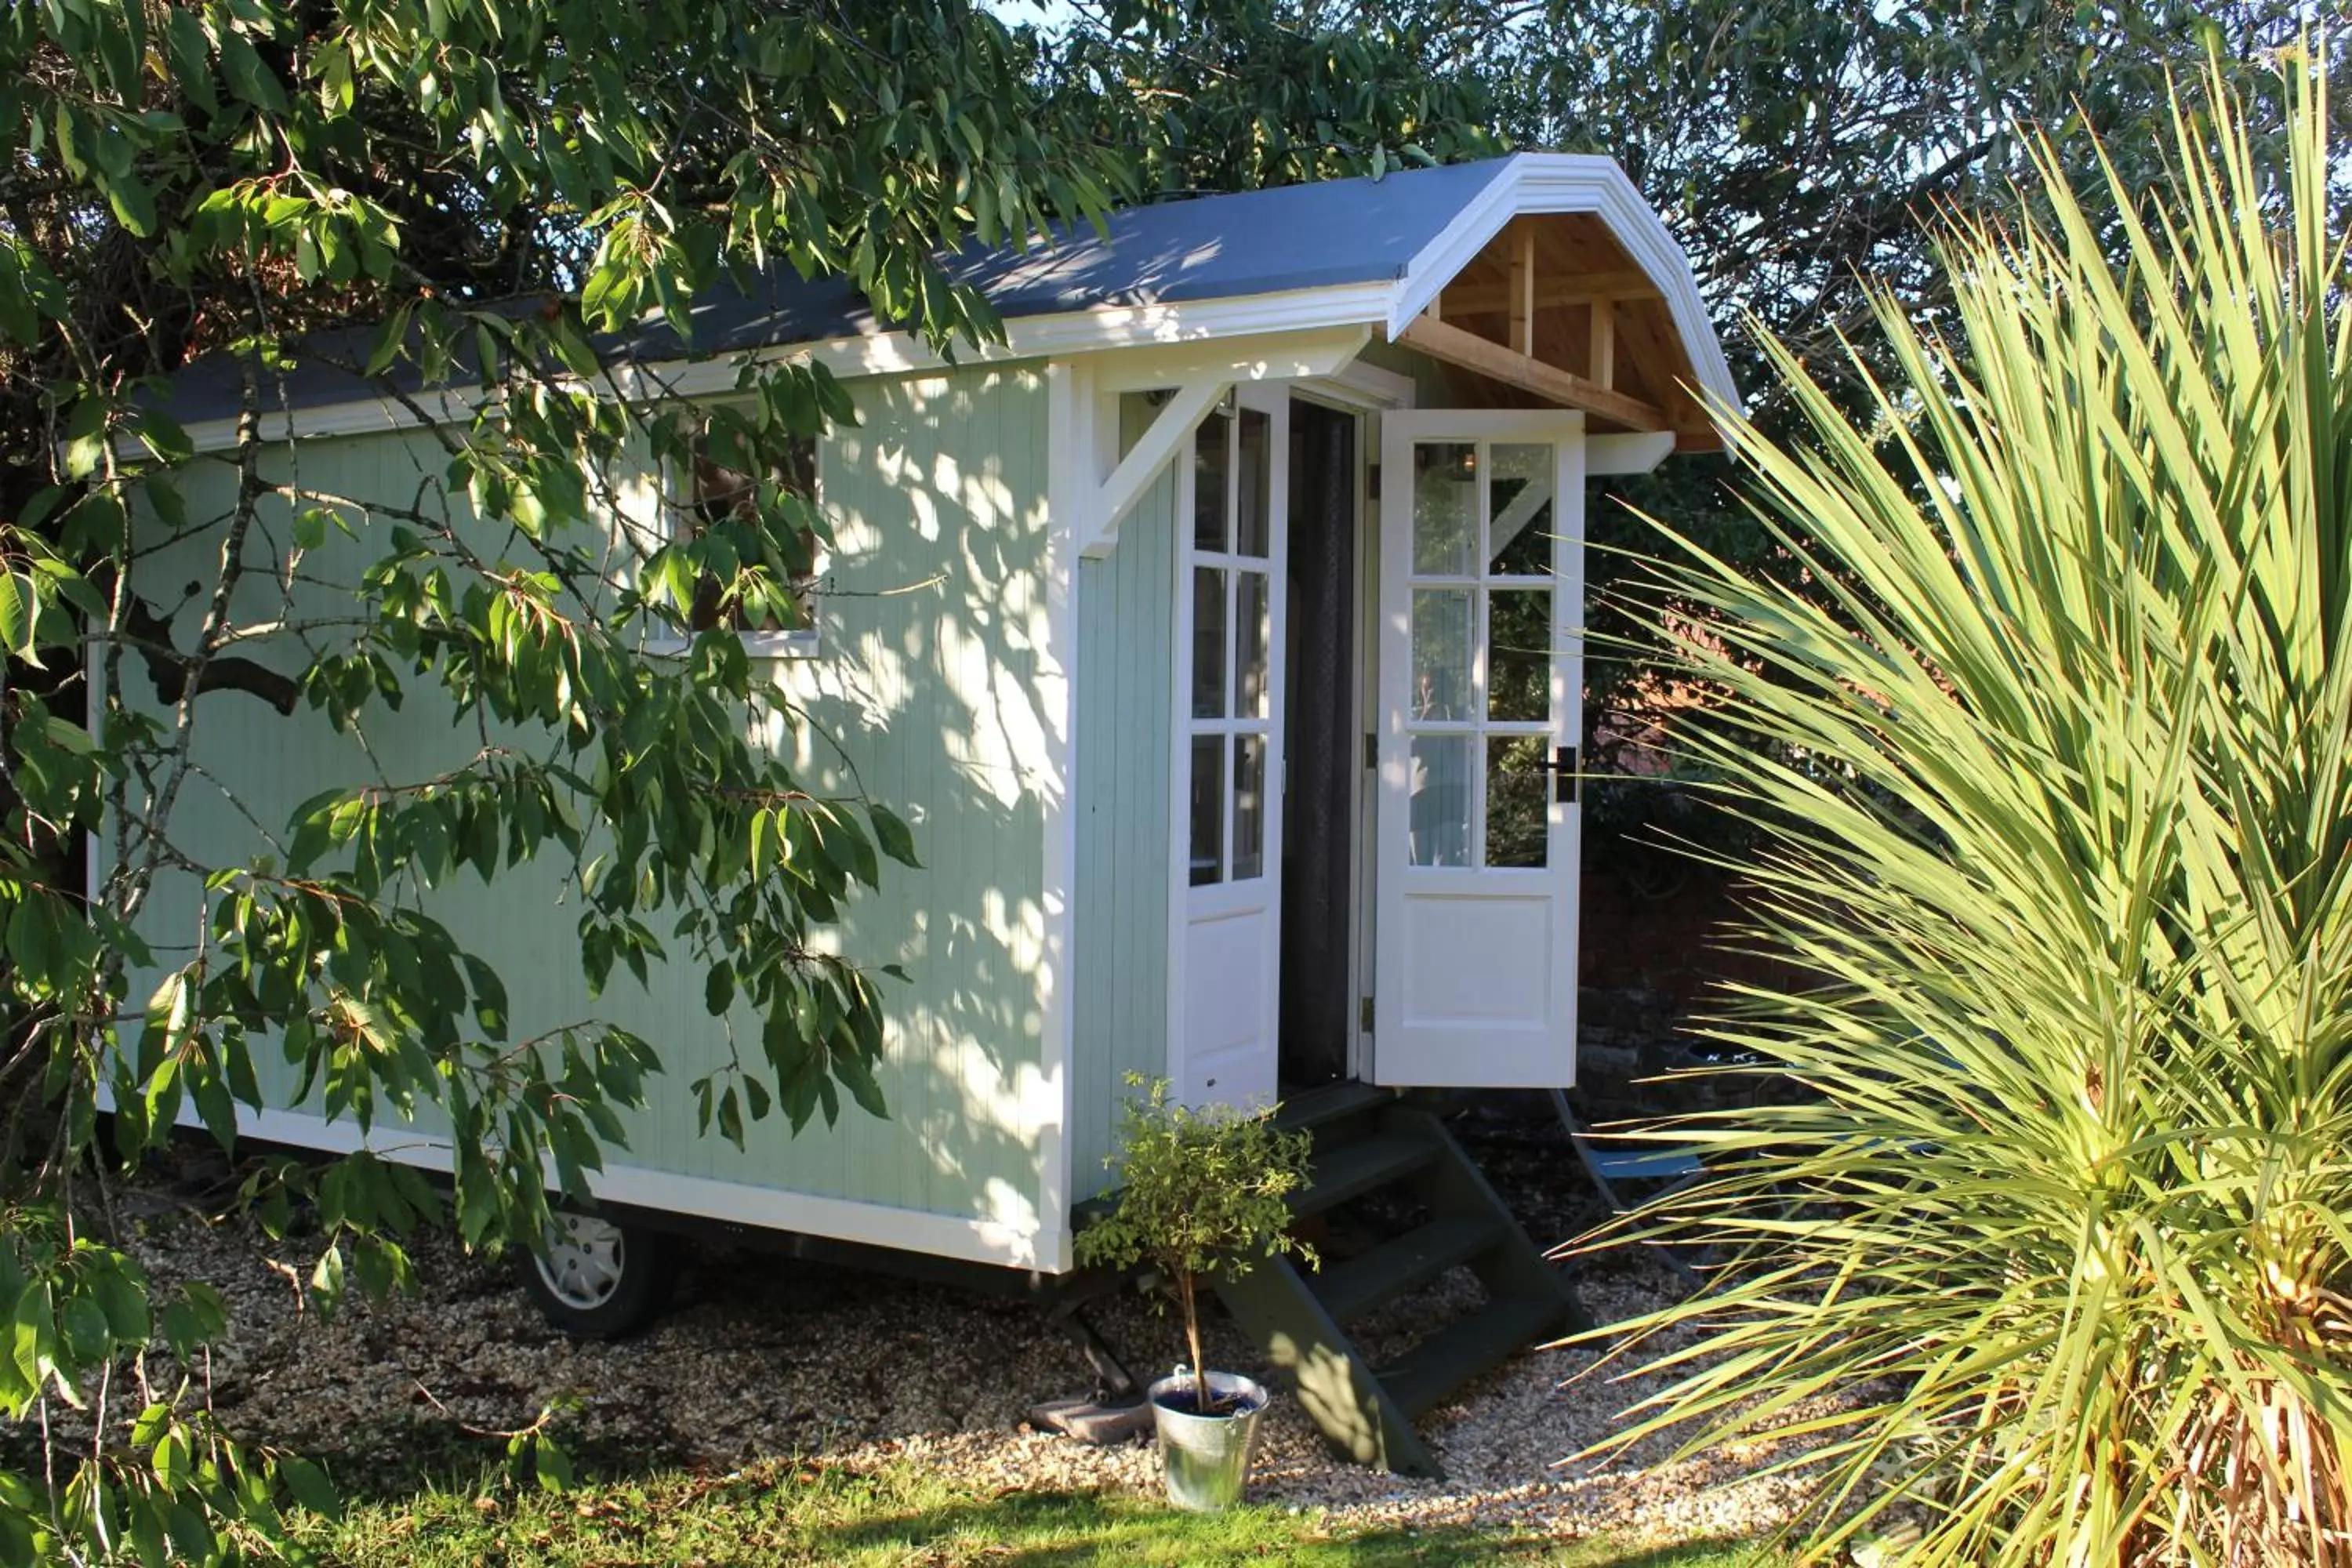 Property Building in Little England Retreats - Cottage, Yurt and Shepherd Huts